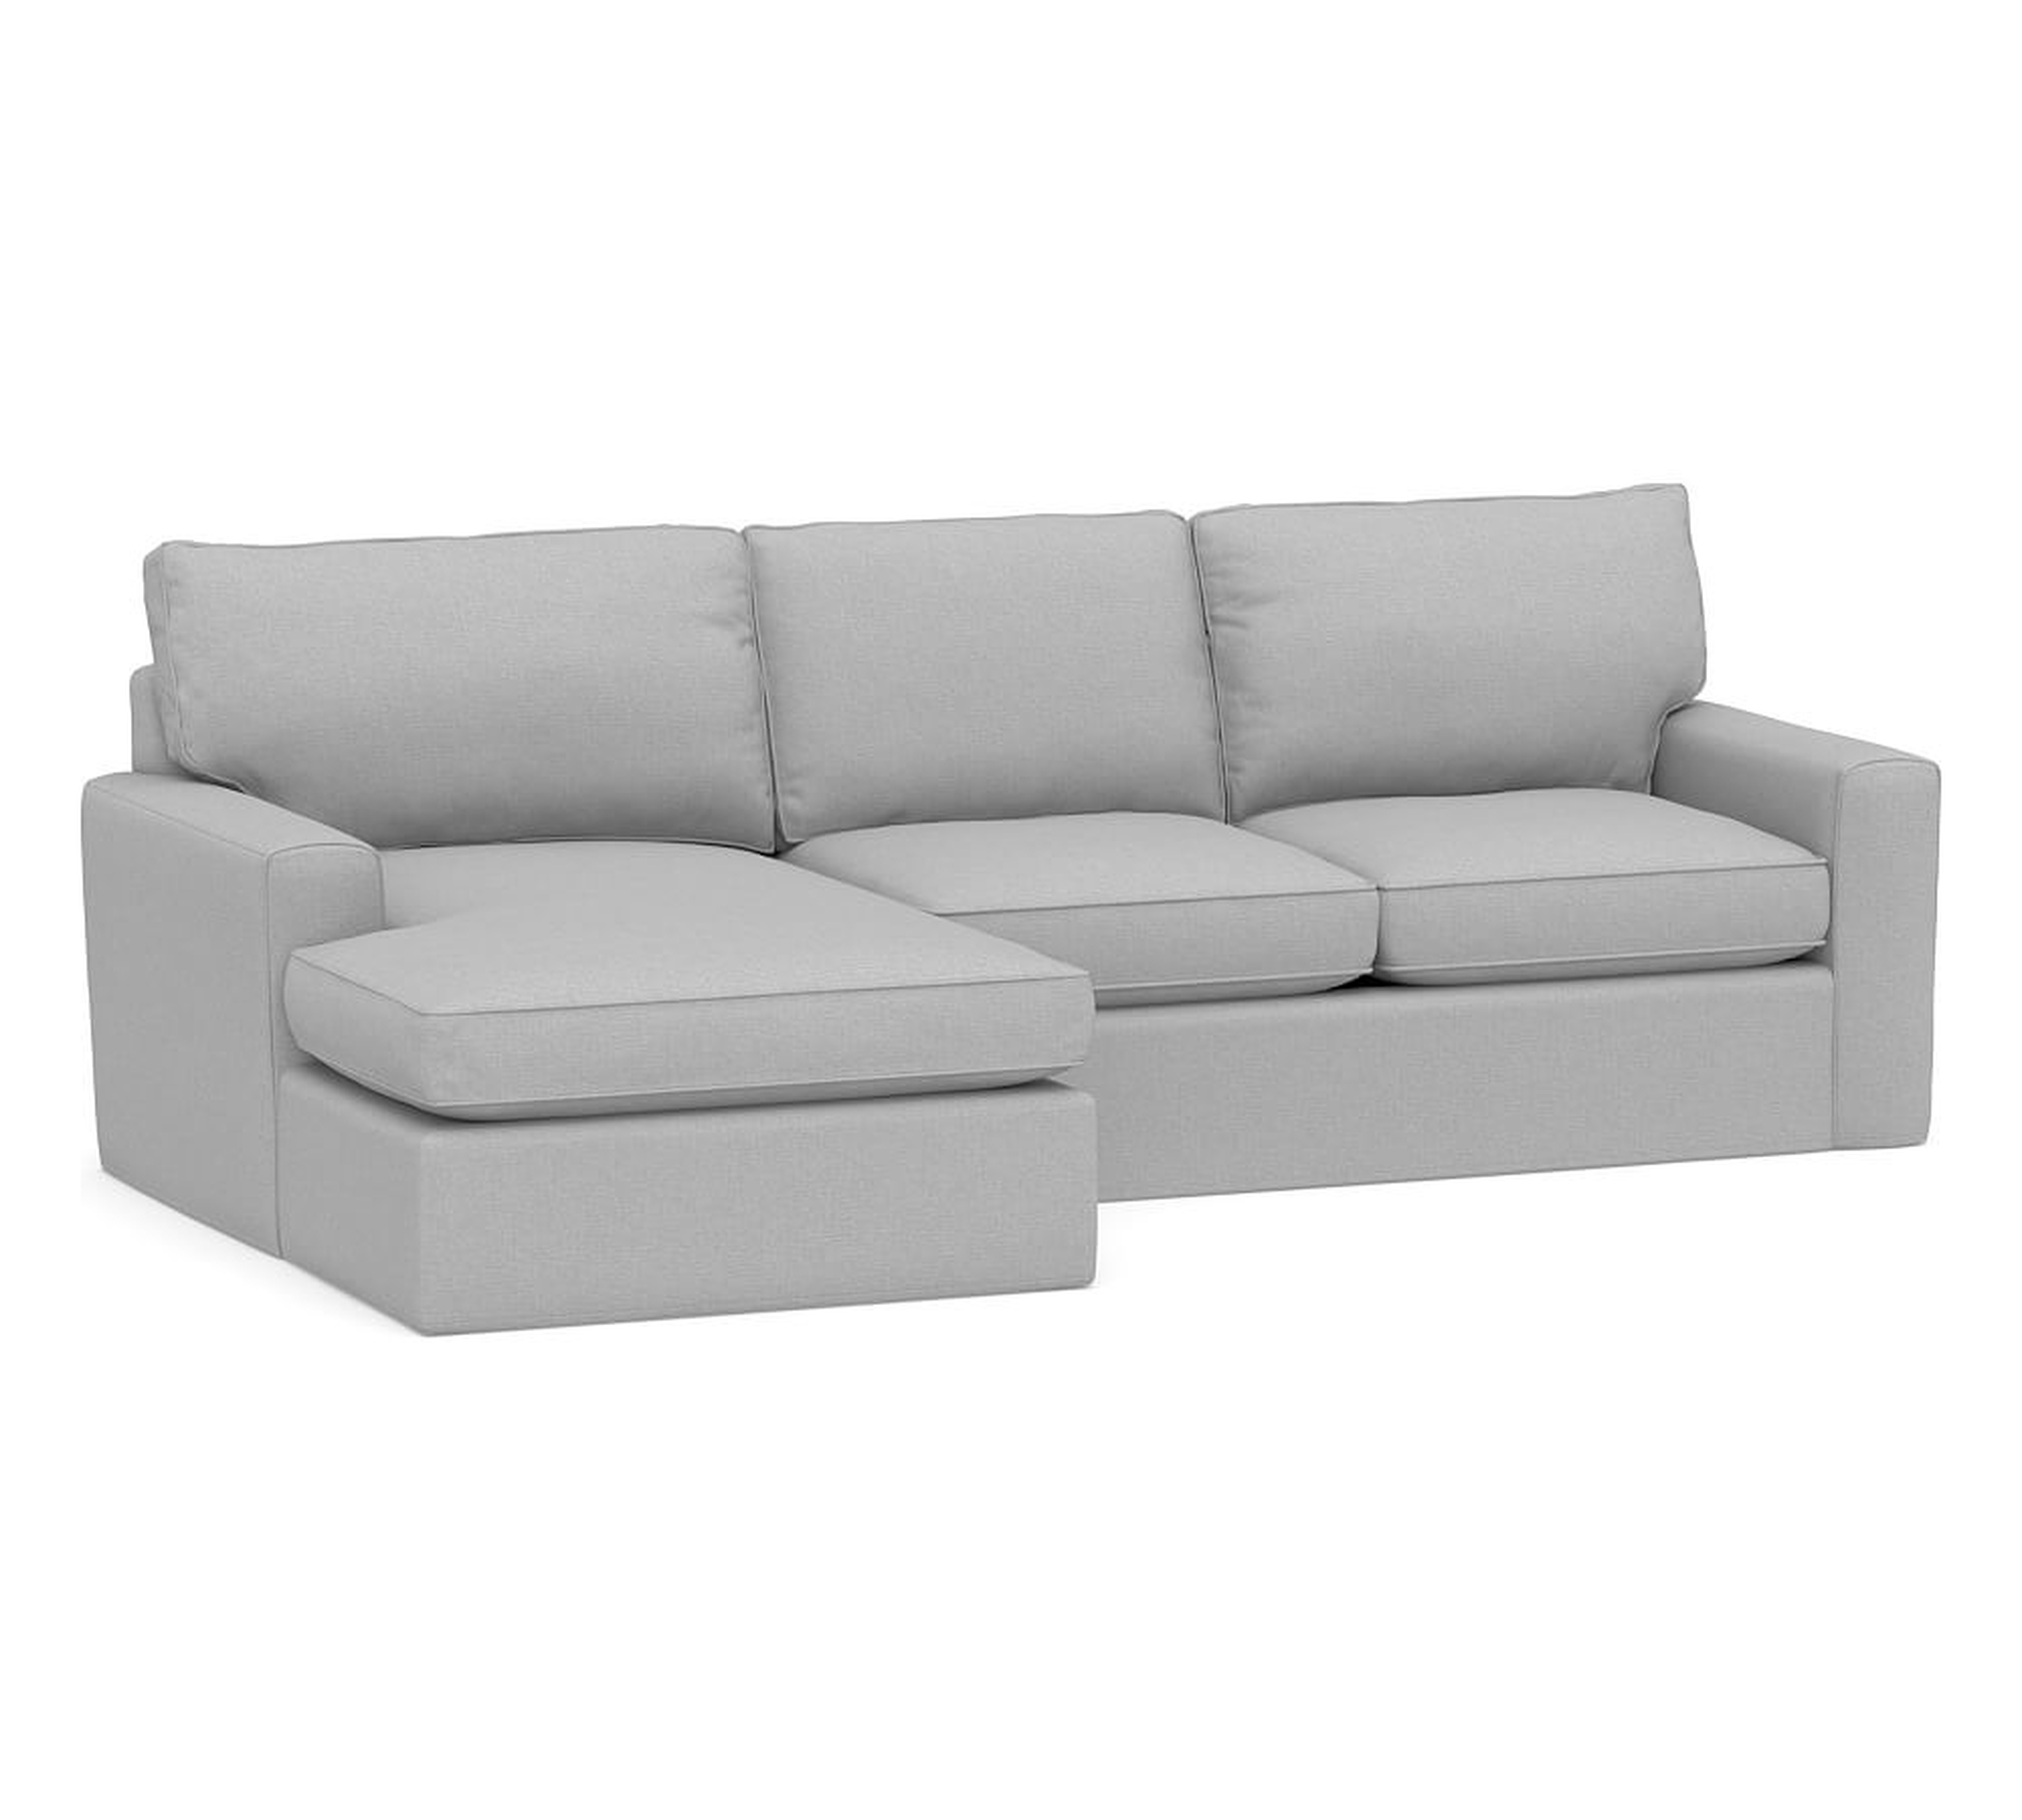 Pearce Square Arm Slipcovered Right Arm Loveseat with Double Chaise Sectional, Down Blend Wrapped Cushions, Brushed Crossweave Light Gray - Pottery Barn